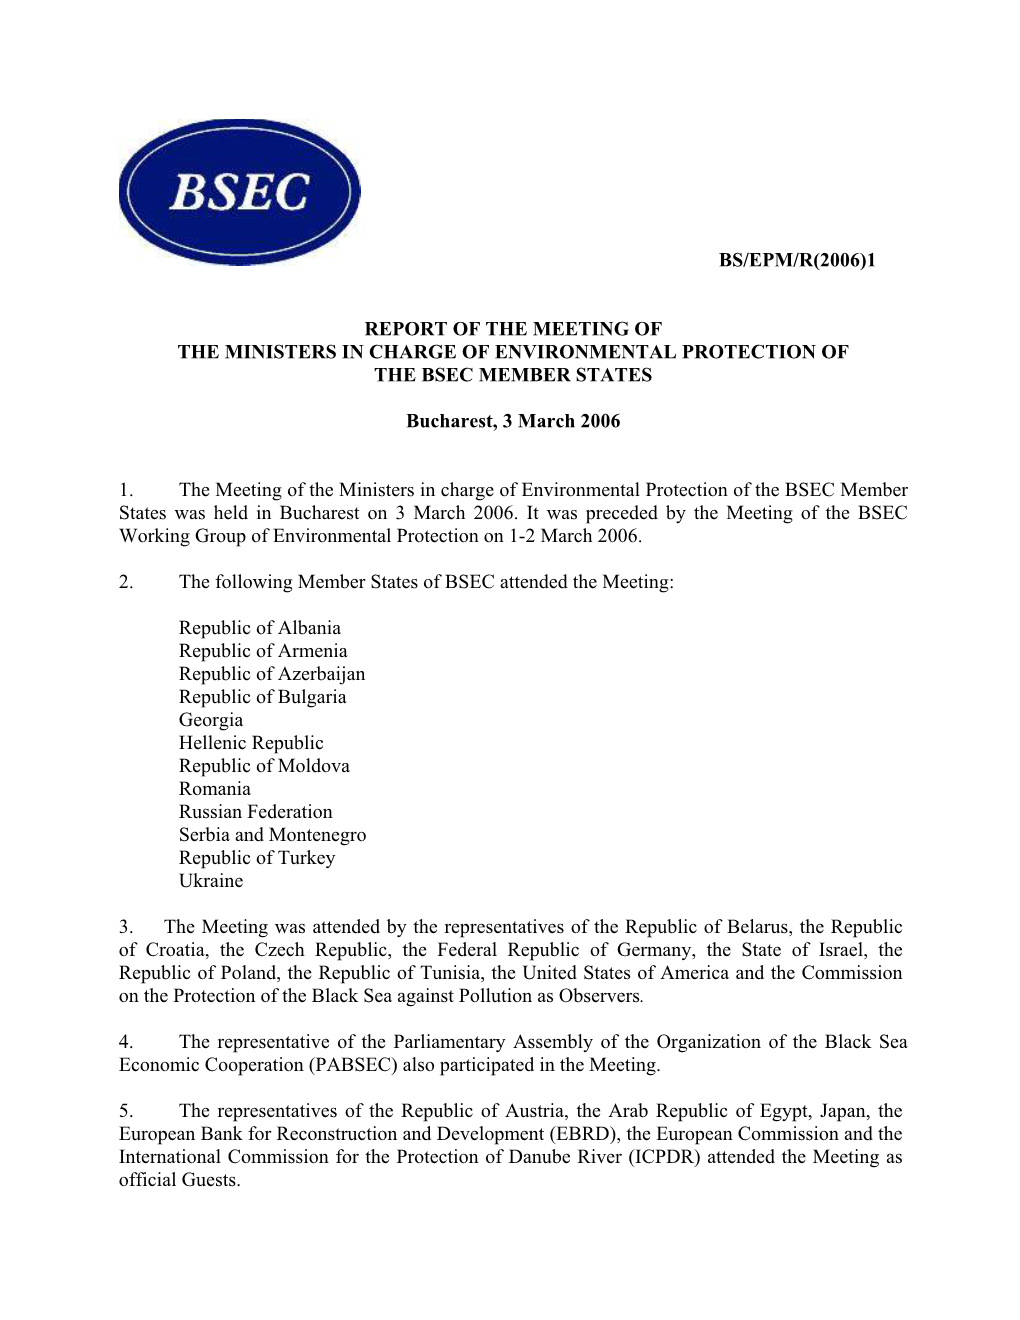 Report of the Meeting of the Ministers in Charge of Environmental Protection of the Bsec Member States